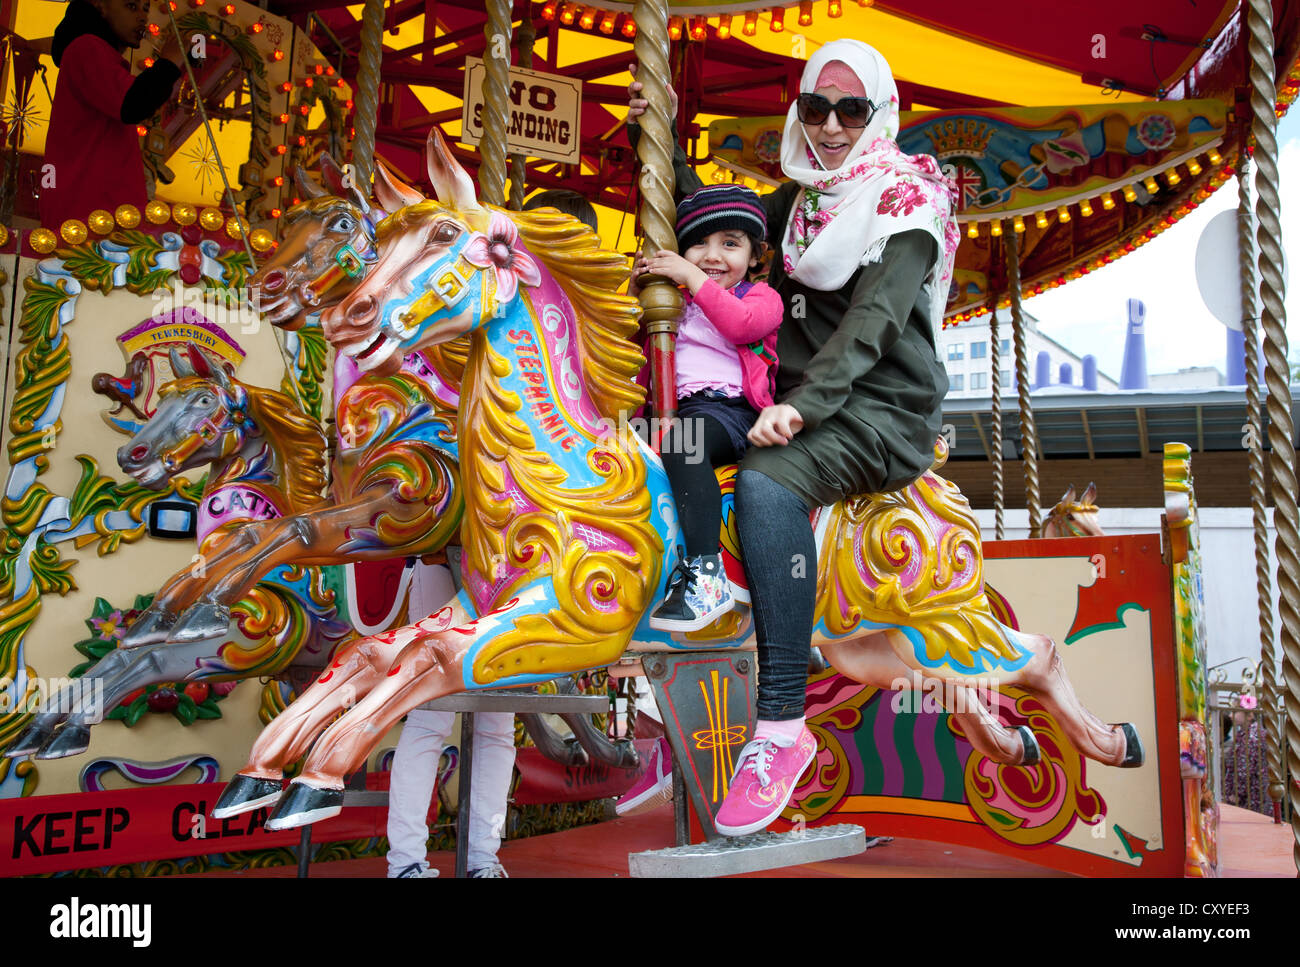 England. London. South Bank. Funfair. Mother and daughter on Carousel pony ride. Stock Photo